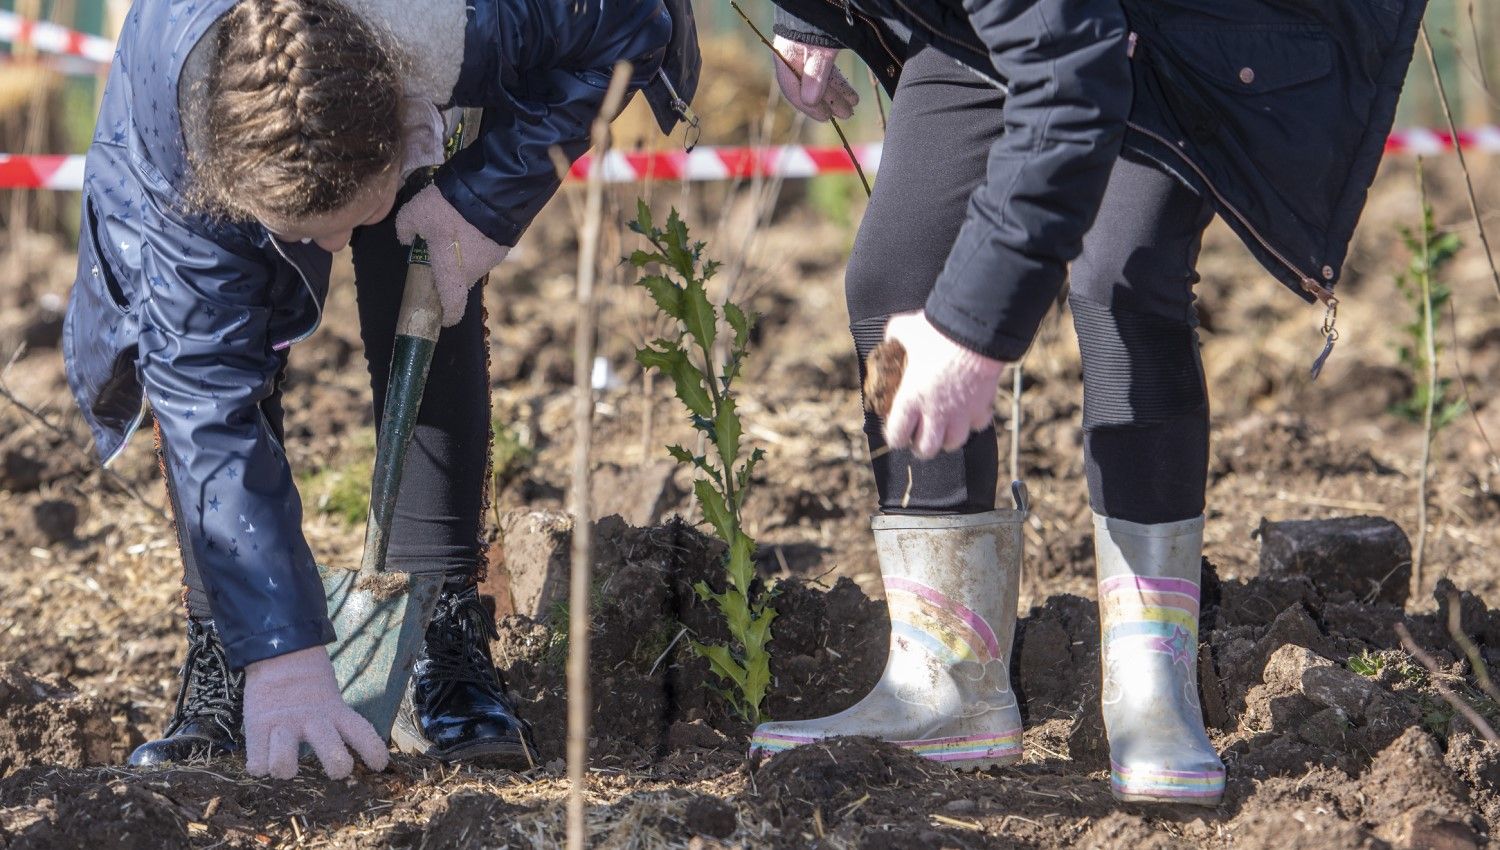 February 2021: Students planting saplings (Photo credit Leicester City Council)